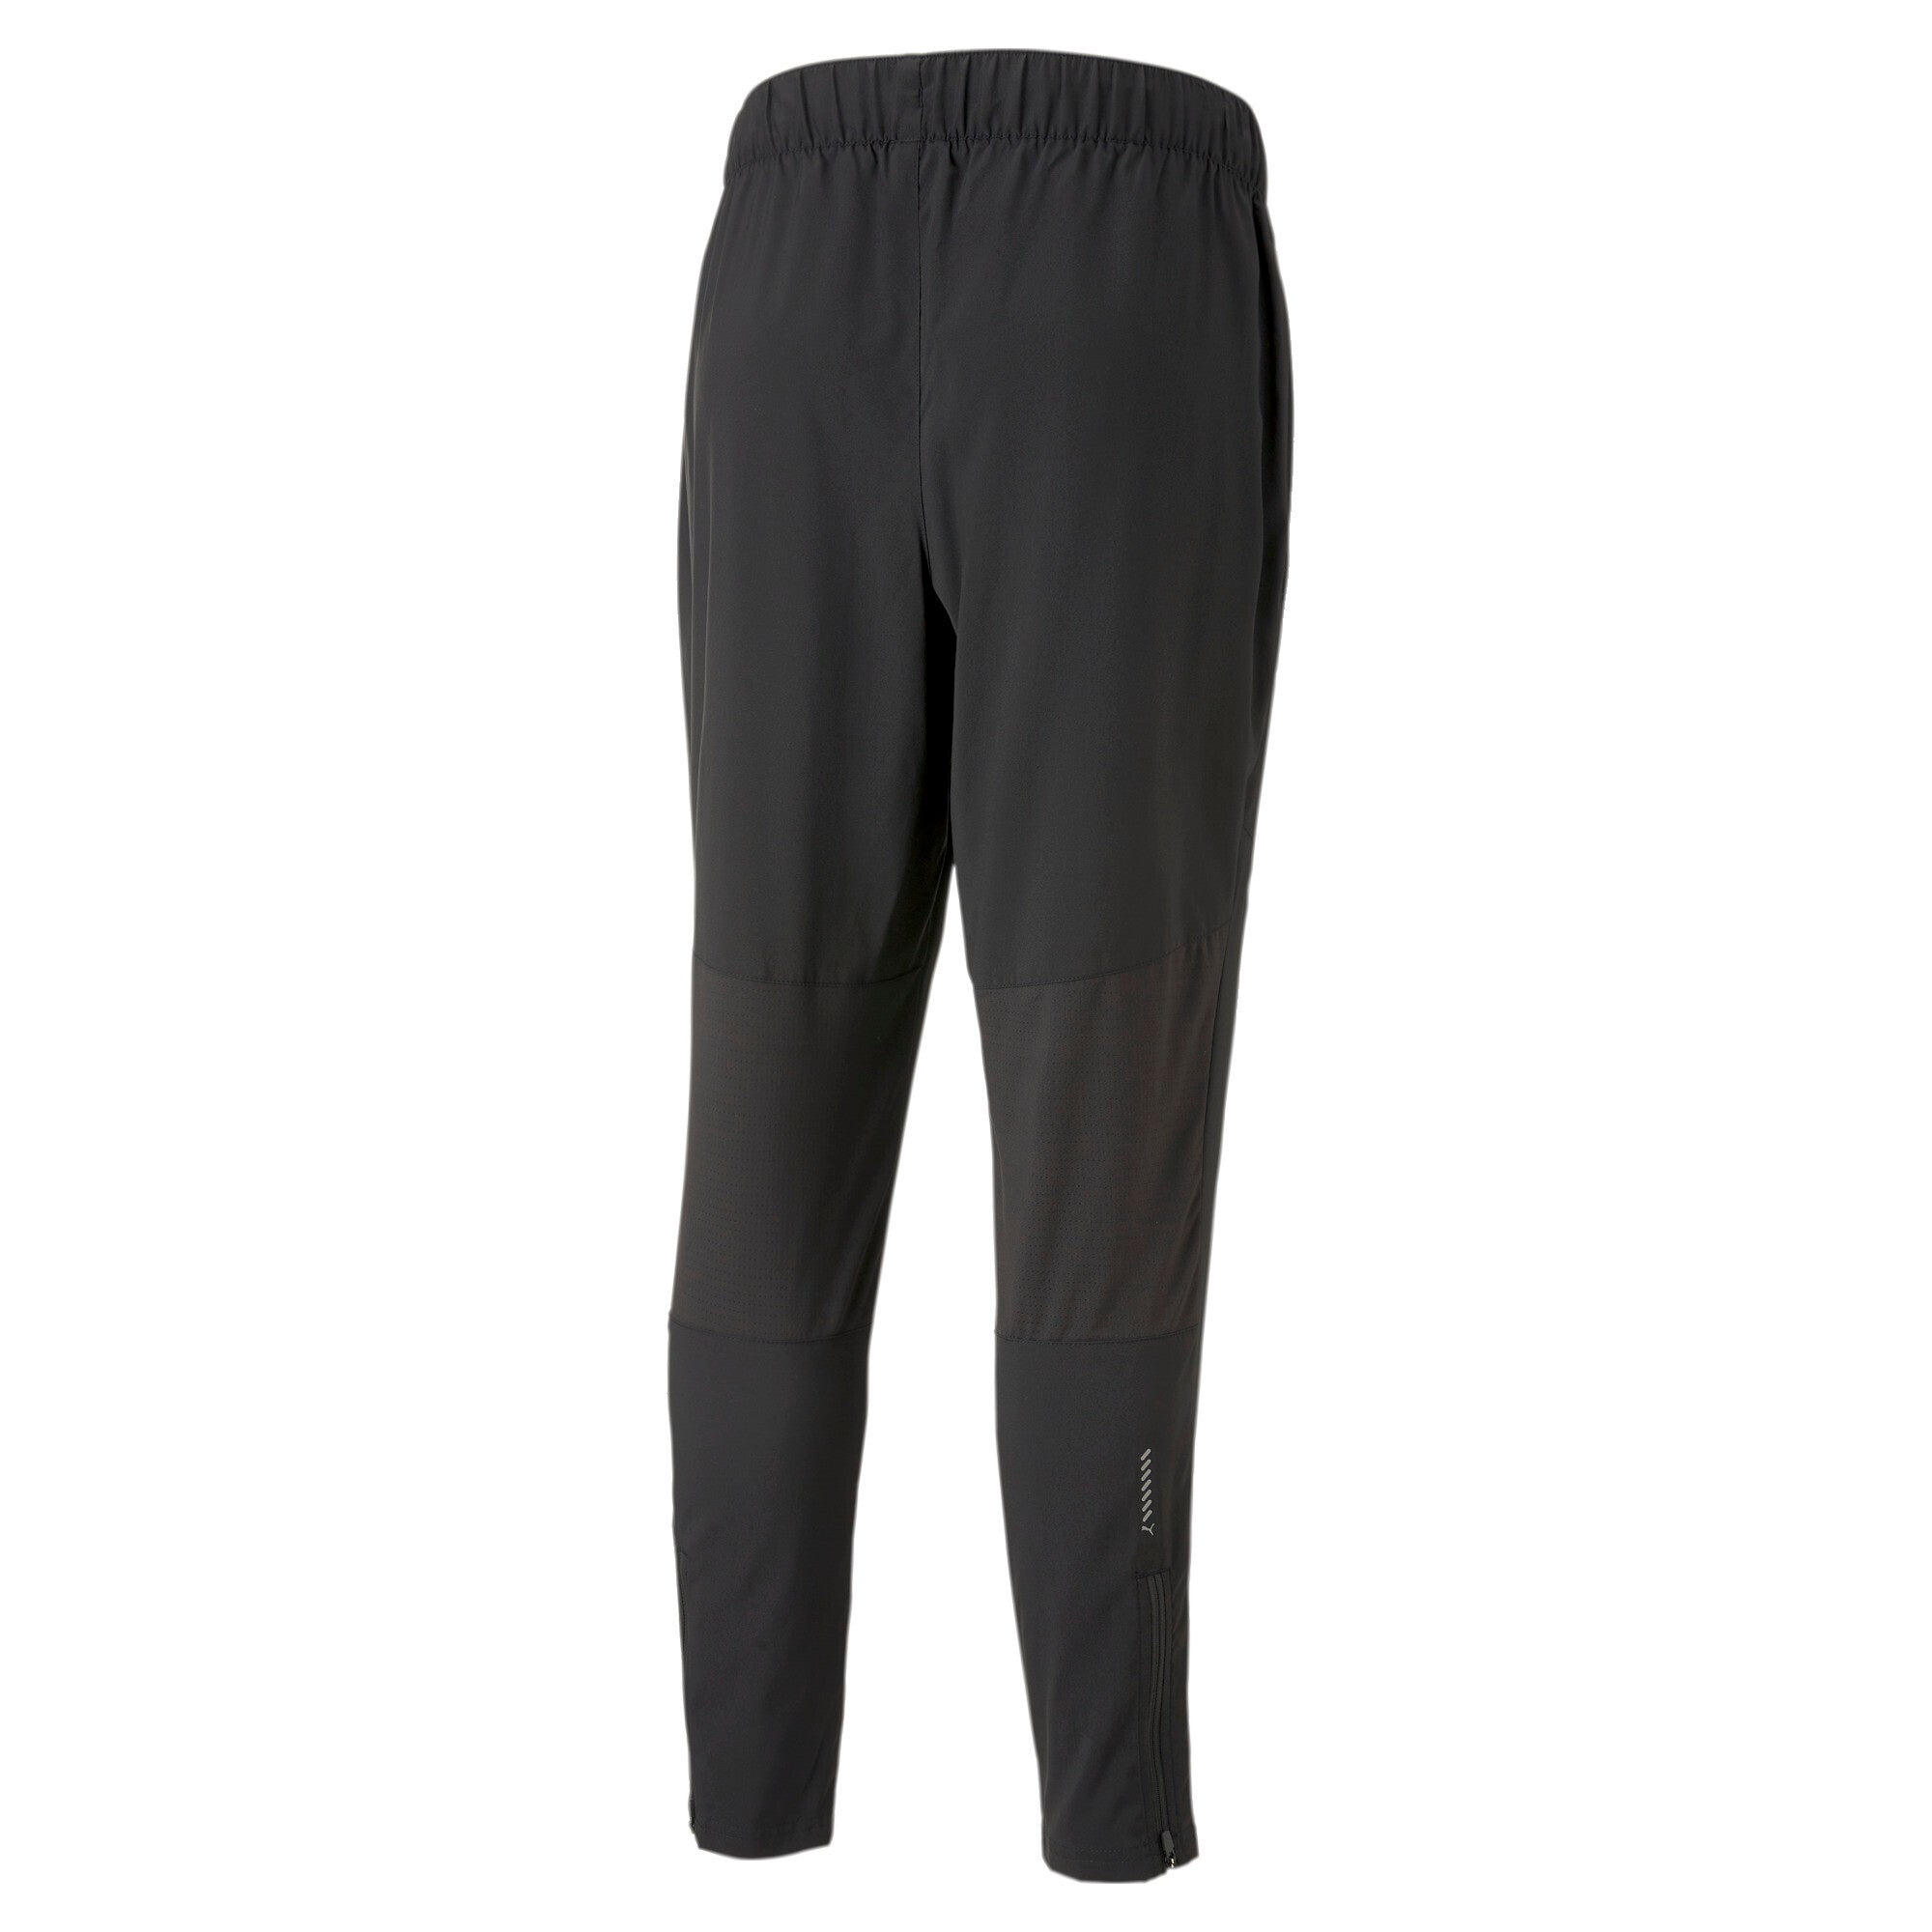 RUN TAPERED WOVEN PANT